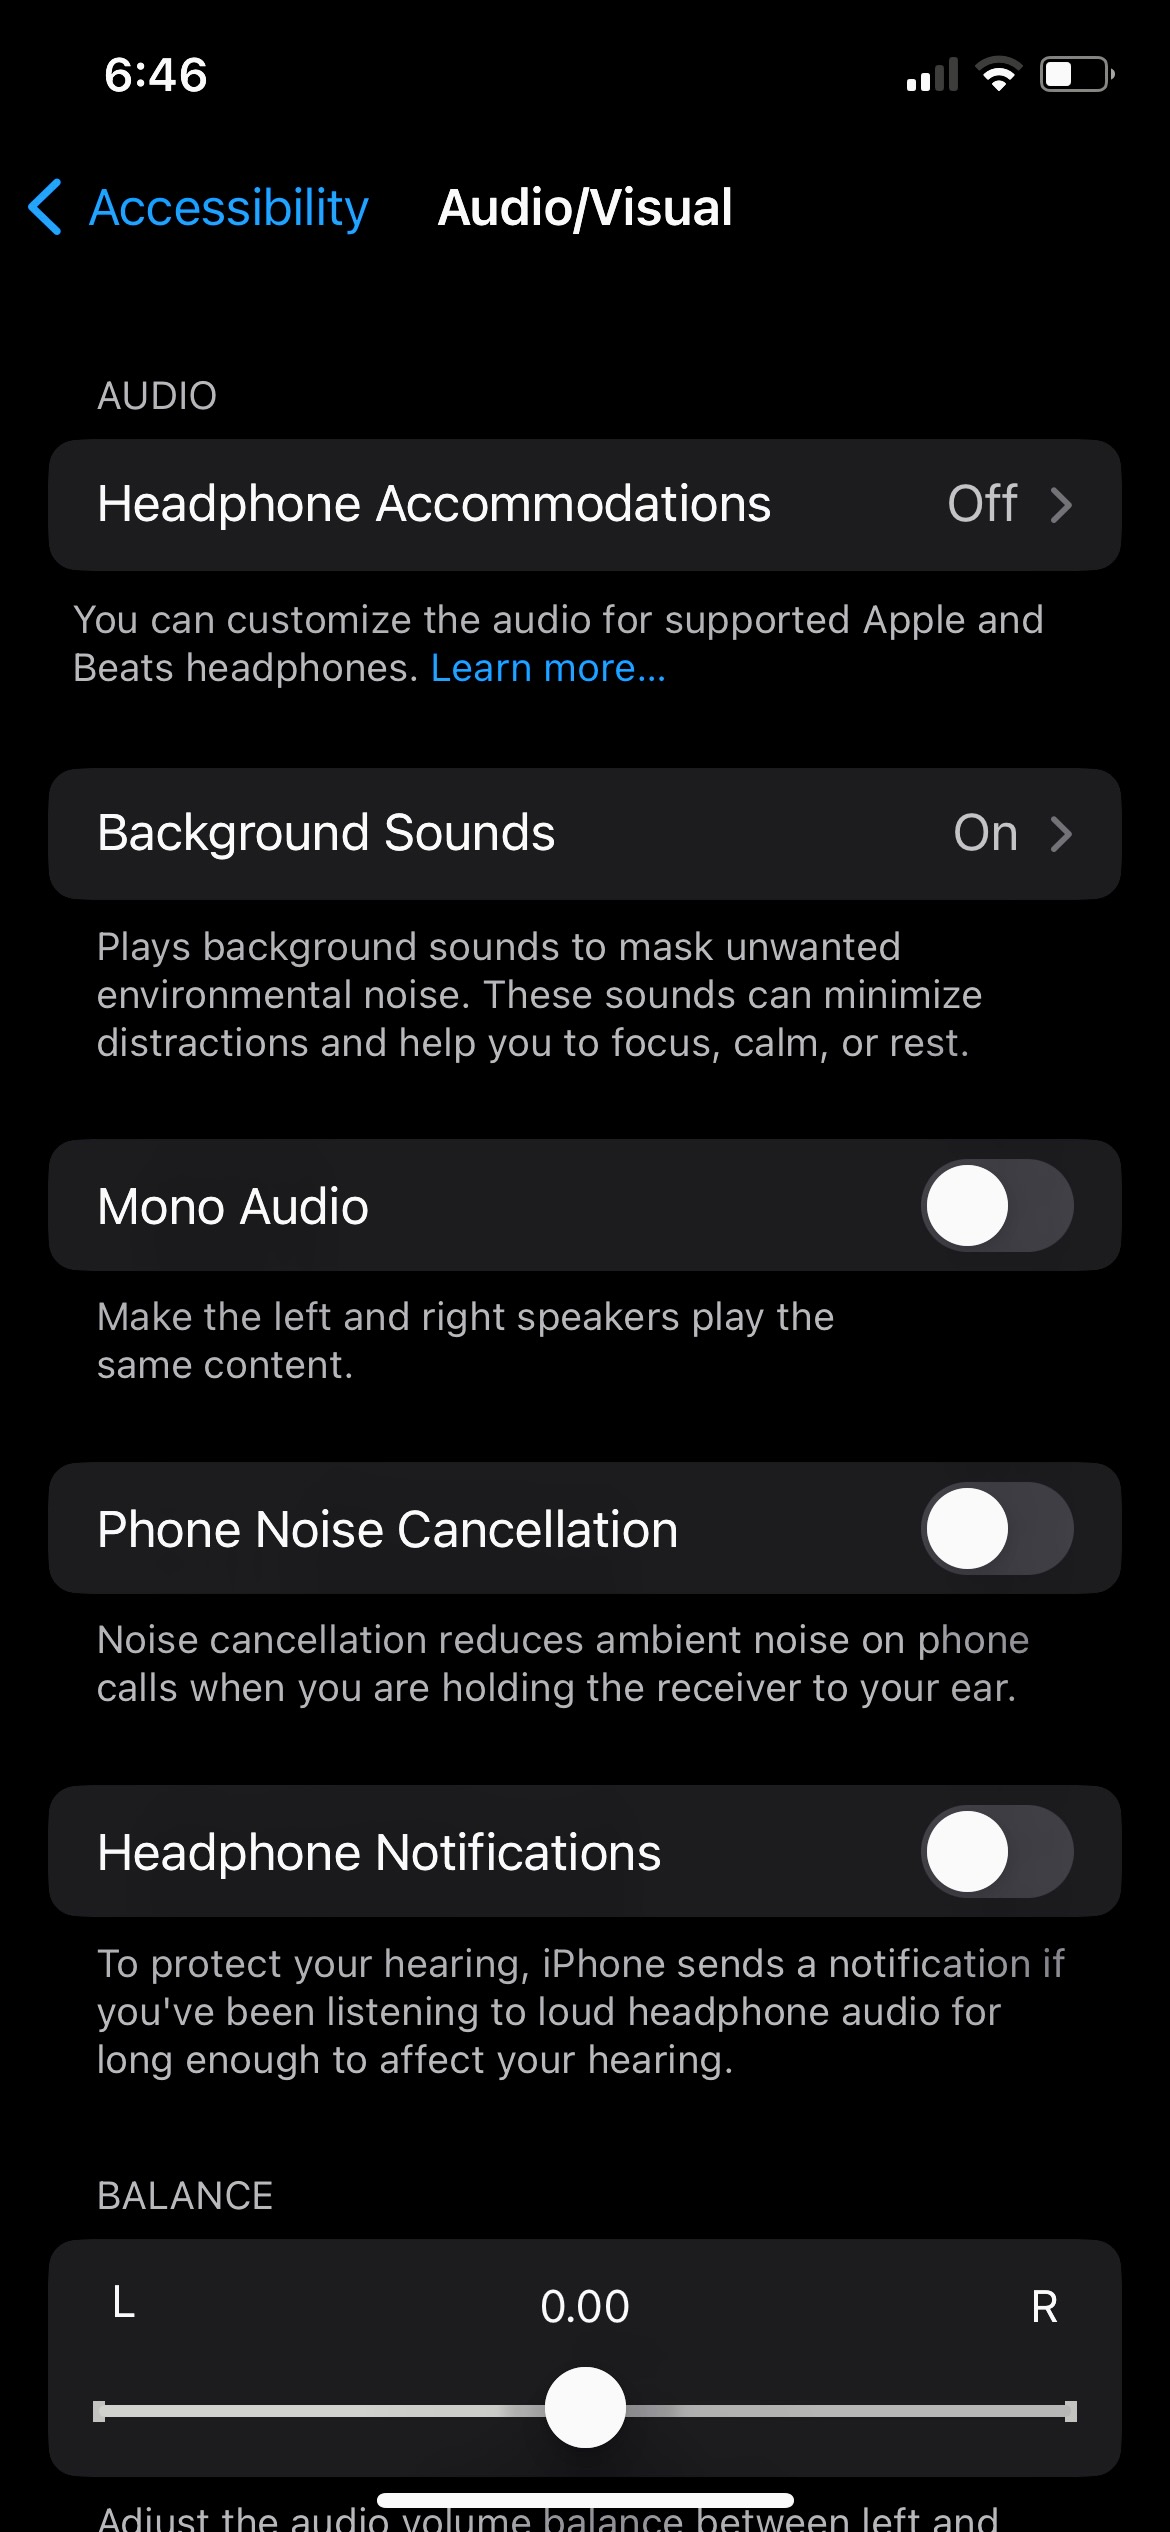 The AirPods Pro 2 Audio Accessibility page.